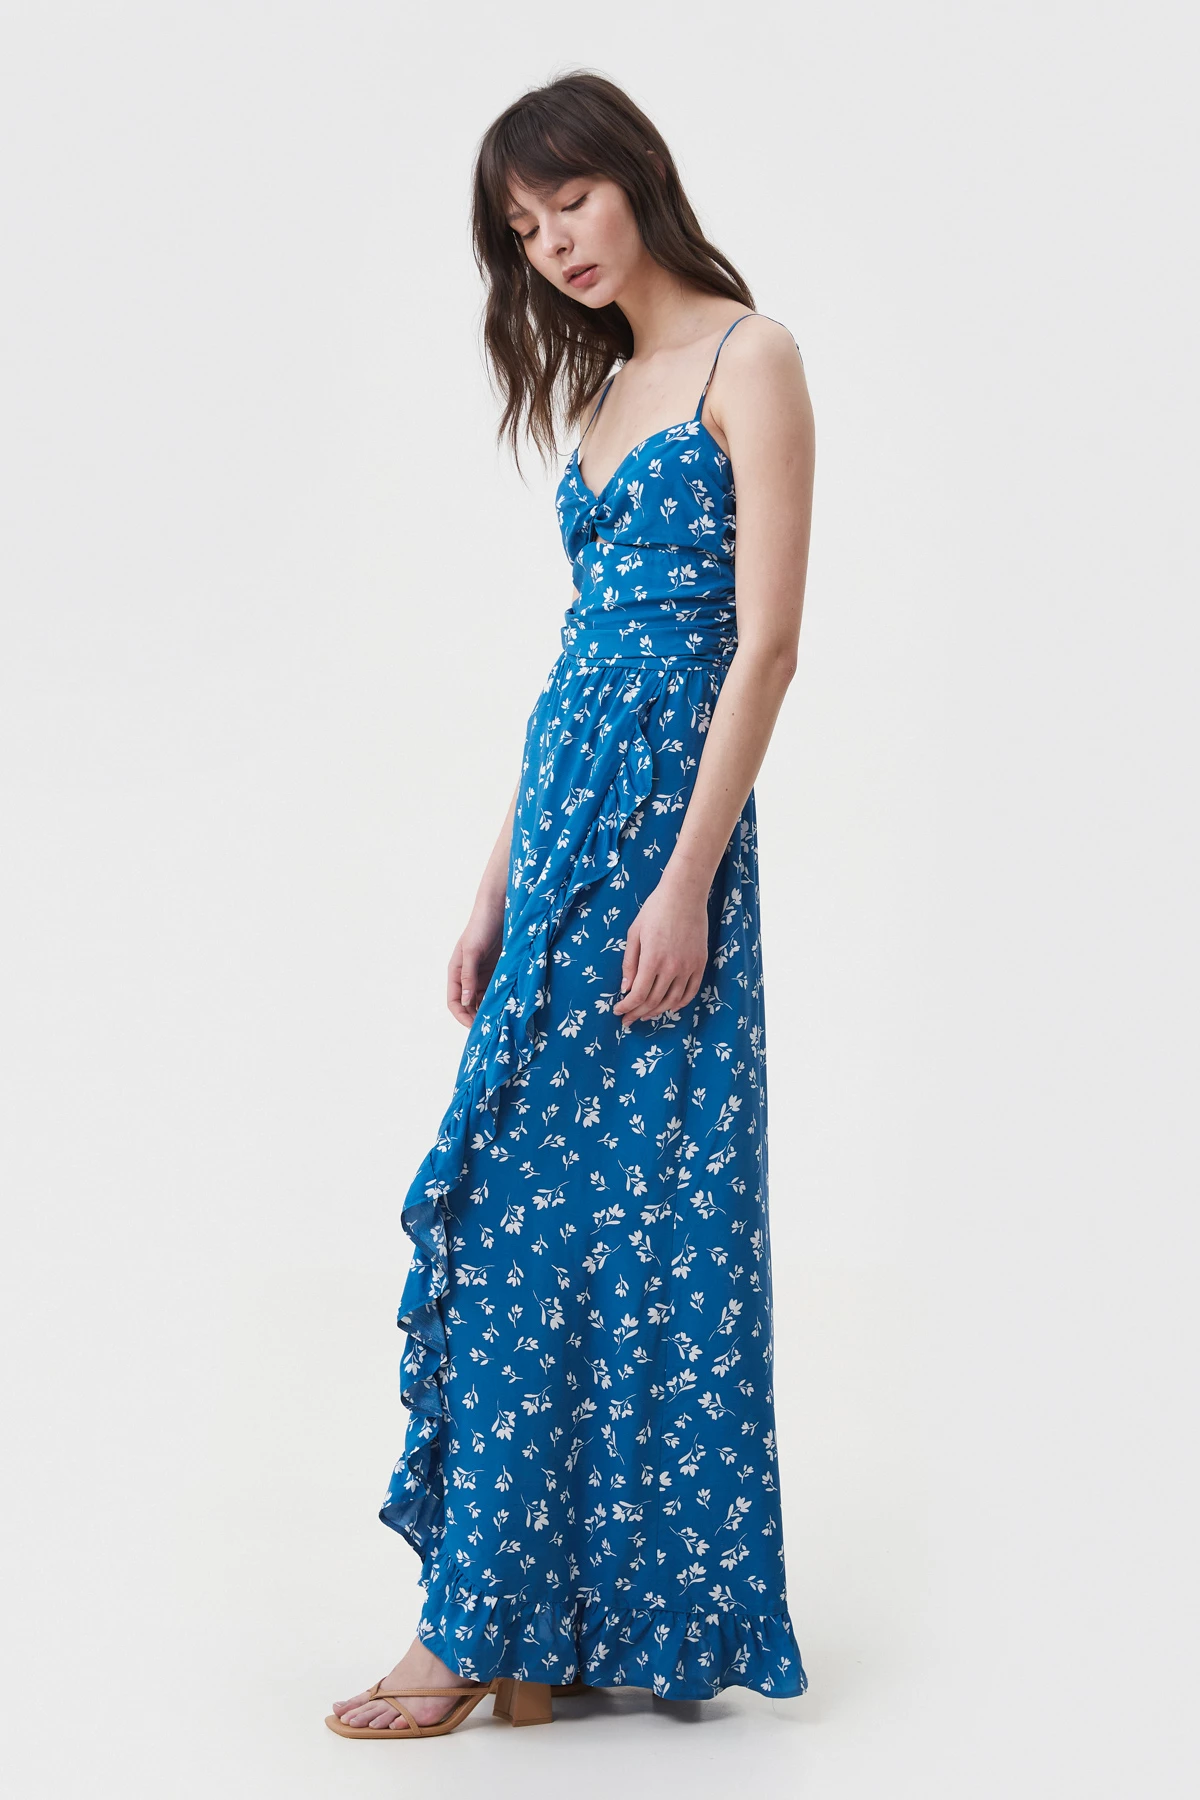 Blue viscose maxi sundress in floral print, photo 4